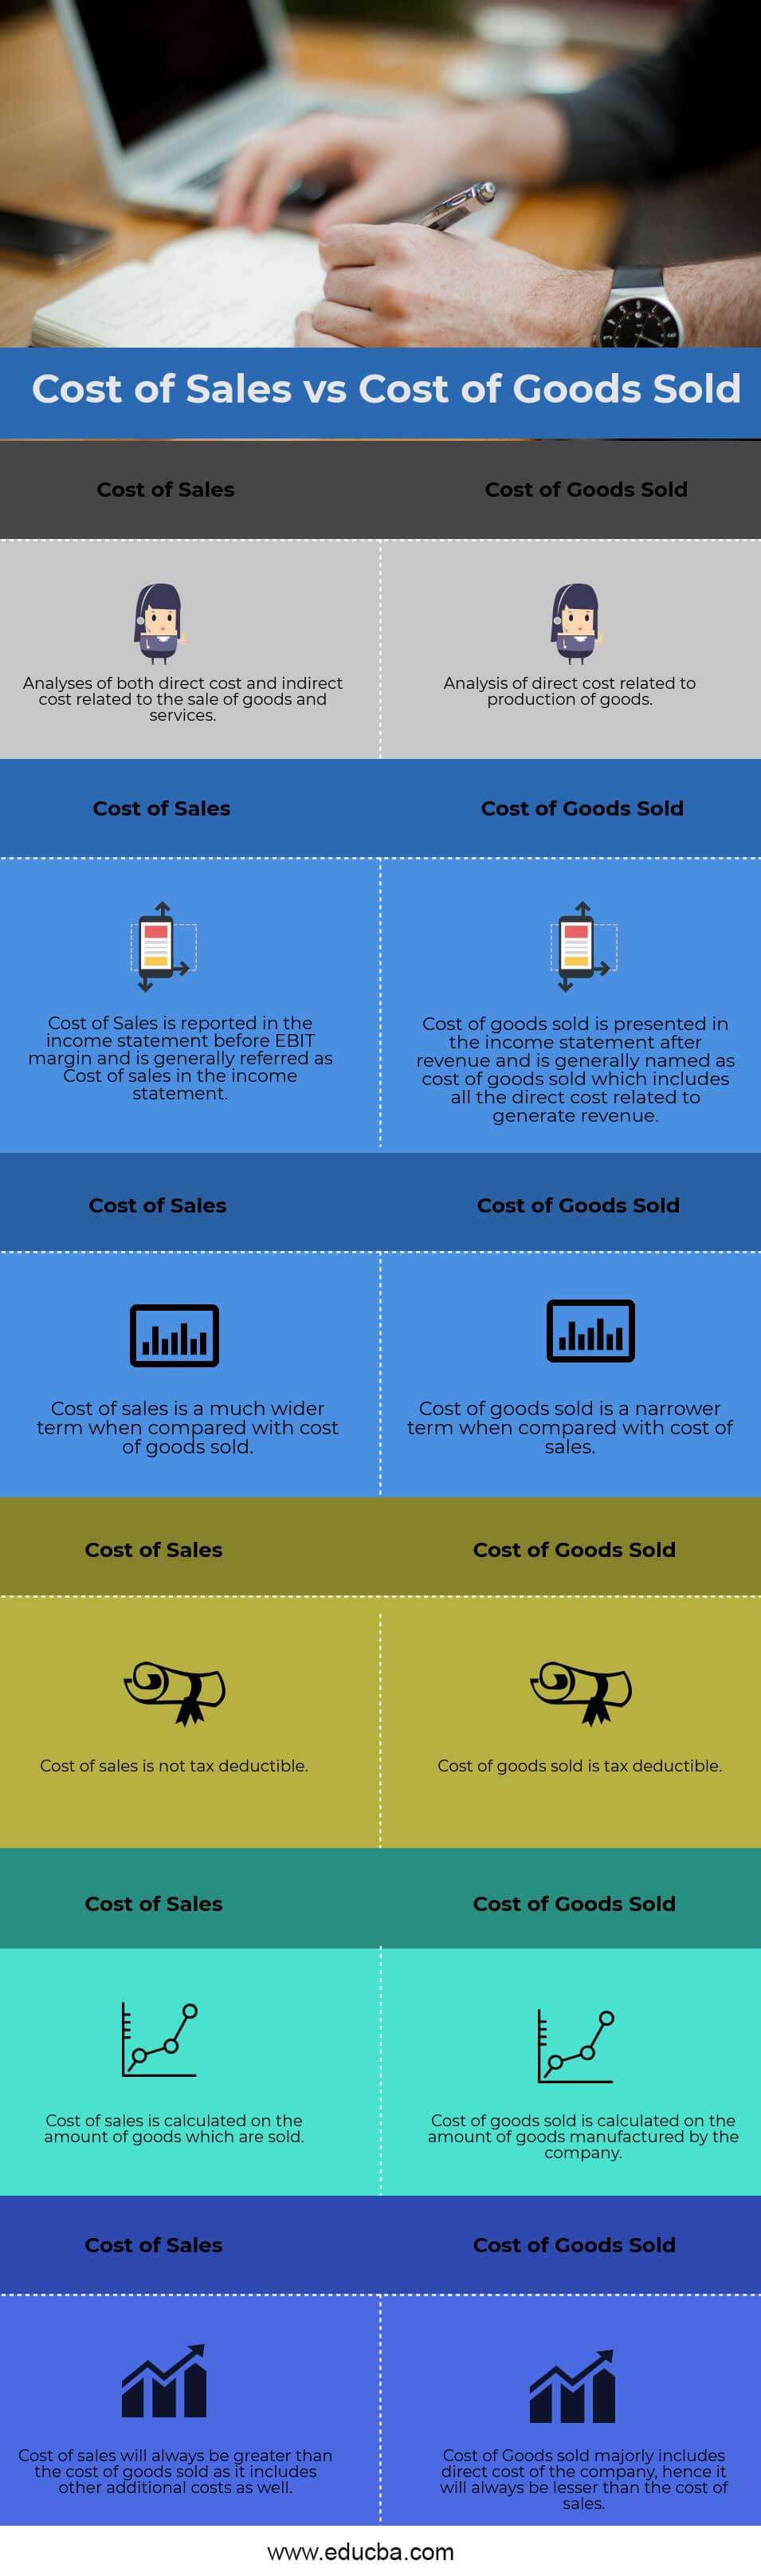 Cost-of-Sales-VS-Cost-of-Goods-Sold-infographic